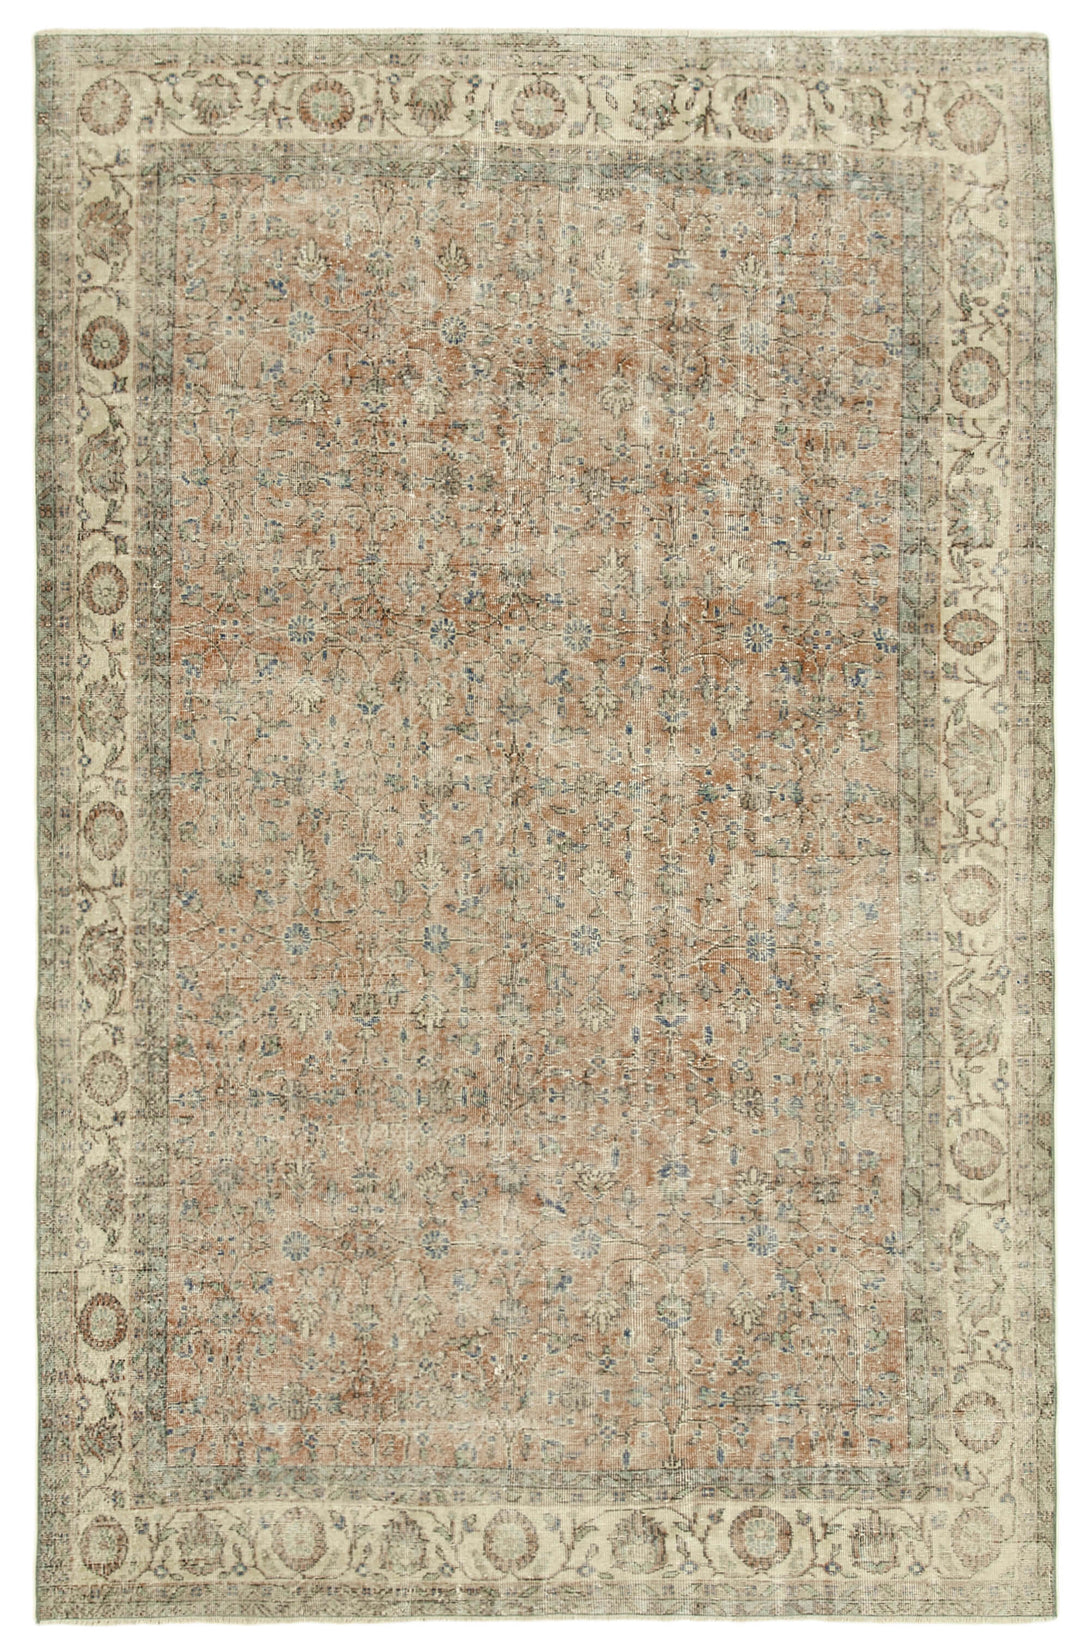 Handmade White Wash Area Rug > Design# OL-AC-38737 > Size: 6'-11" x 10'-6", Carpet Culture Rugs, Handmade Rugs, NYC Rugs, New Rugs, Shop Rugs, Rug Store, Outlet Rugs, SoHo Rugs, Rugs in USA